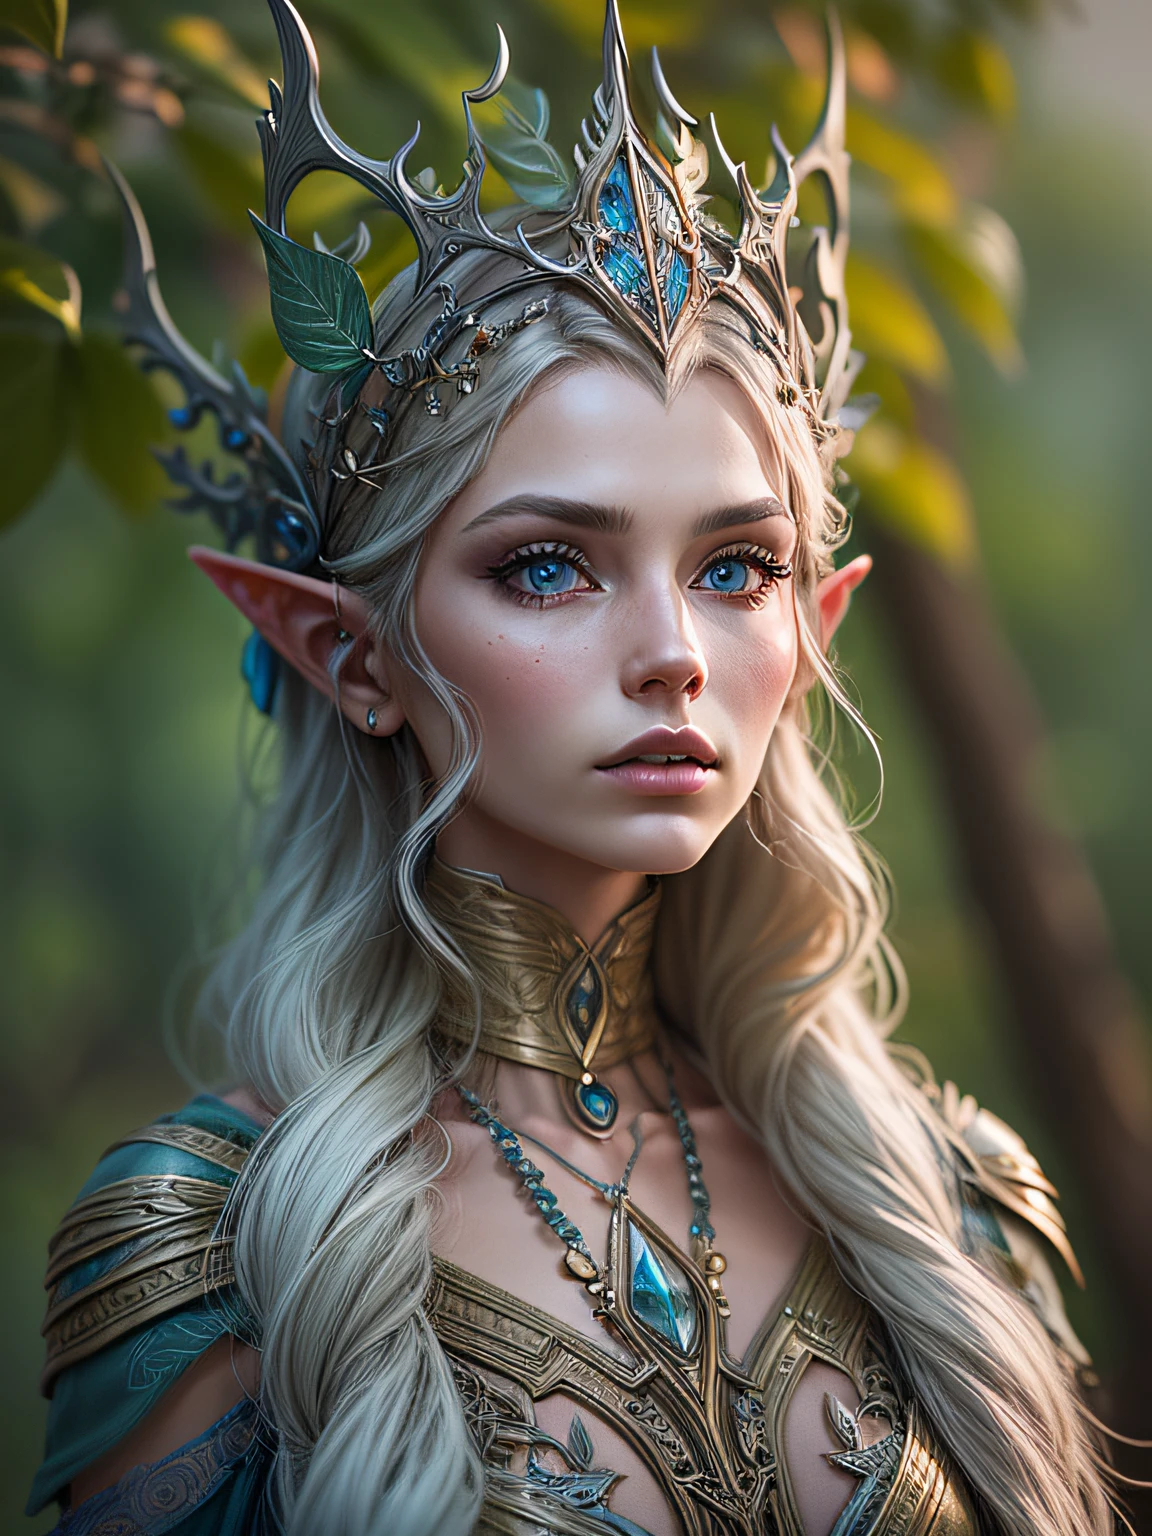 8k, ultra detailed, photograph of a beautiful elven woman, high fashion elven style